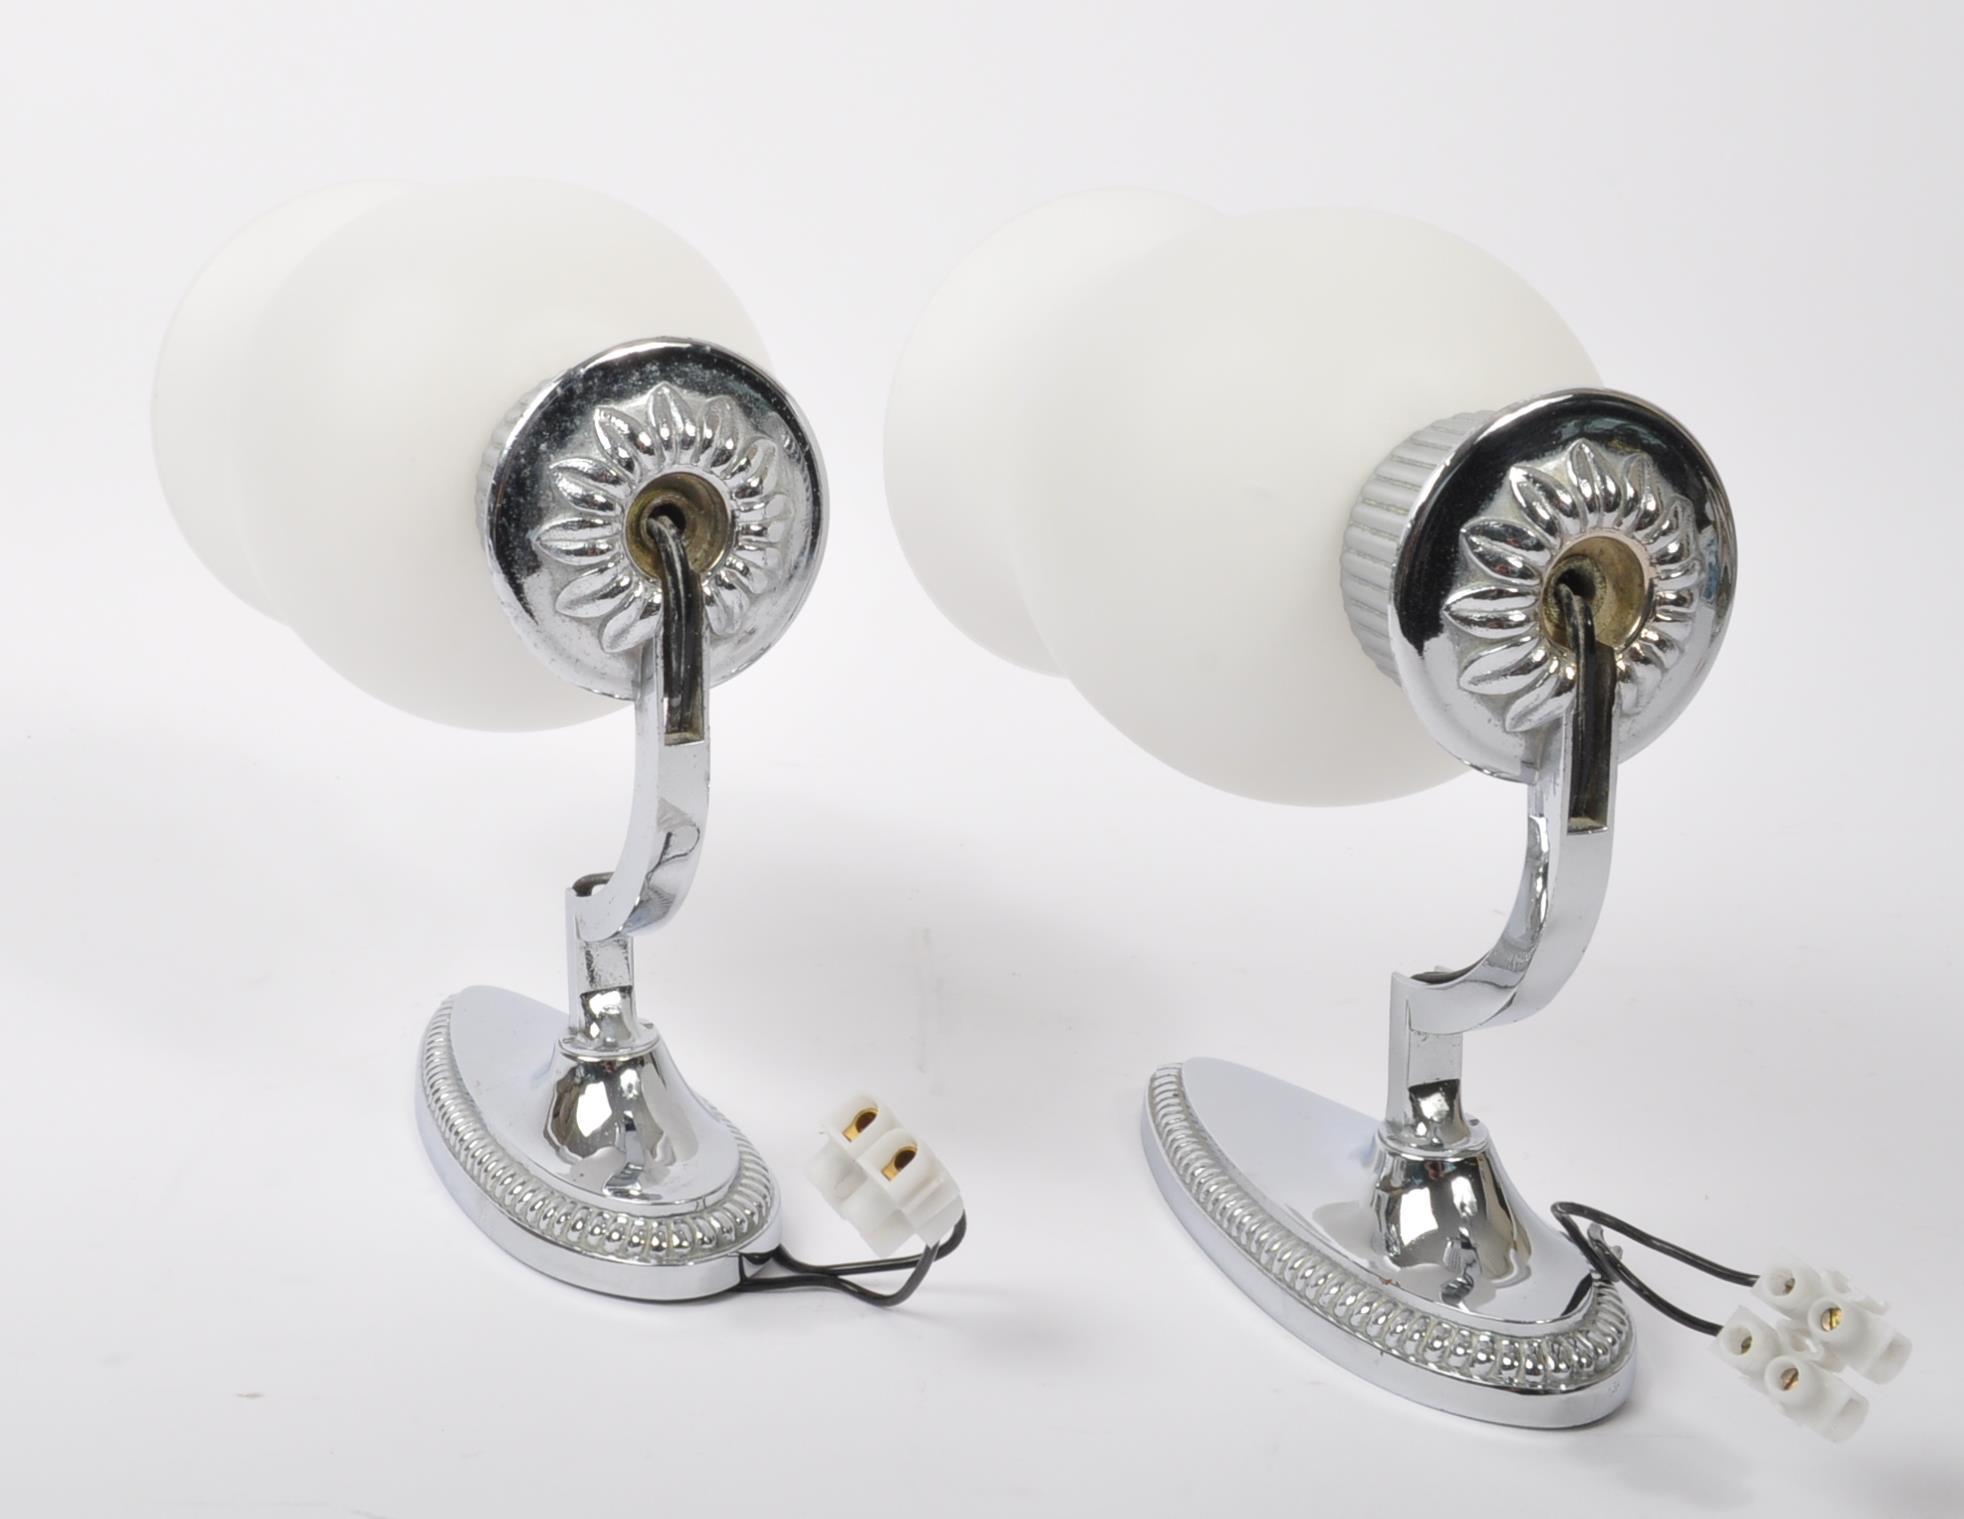 TWO PAIRS OF ART DECO CHROME & BAKELITE WALL SCONCES - Image 5 of 5